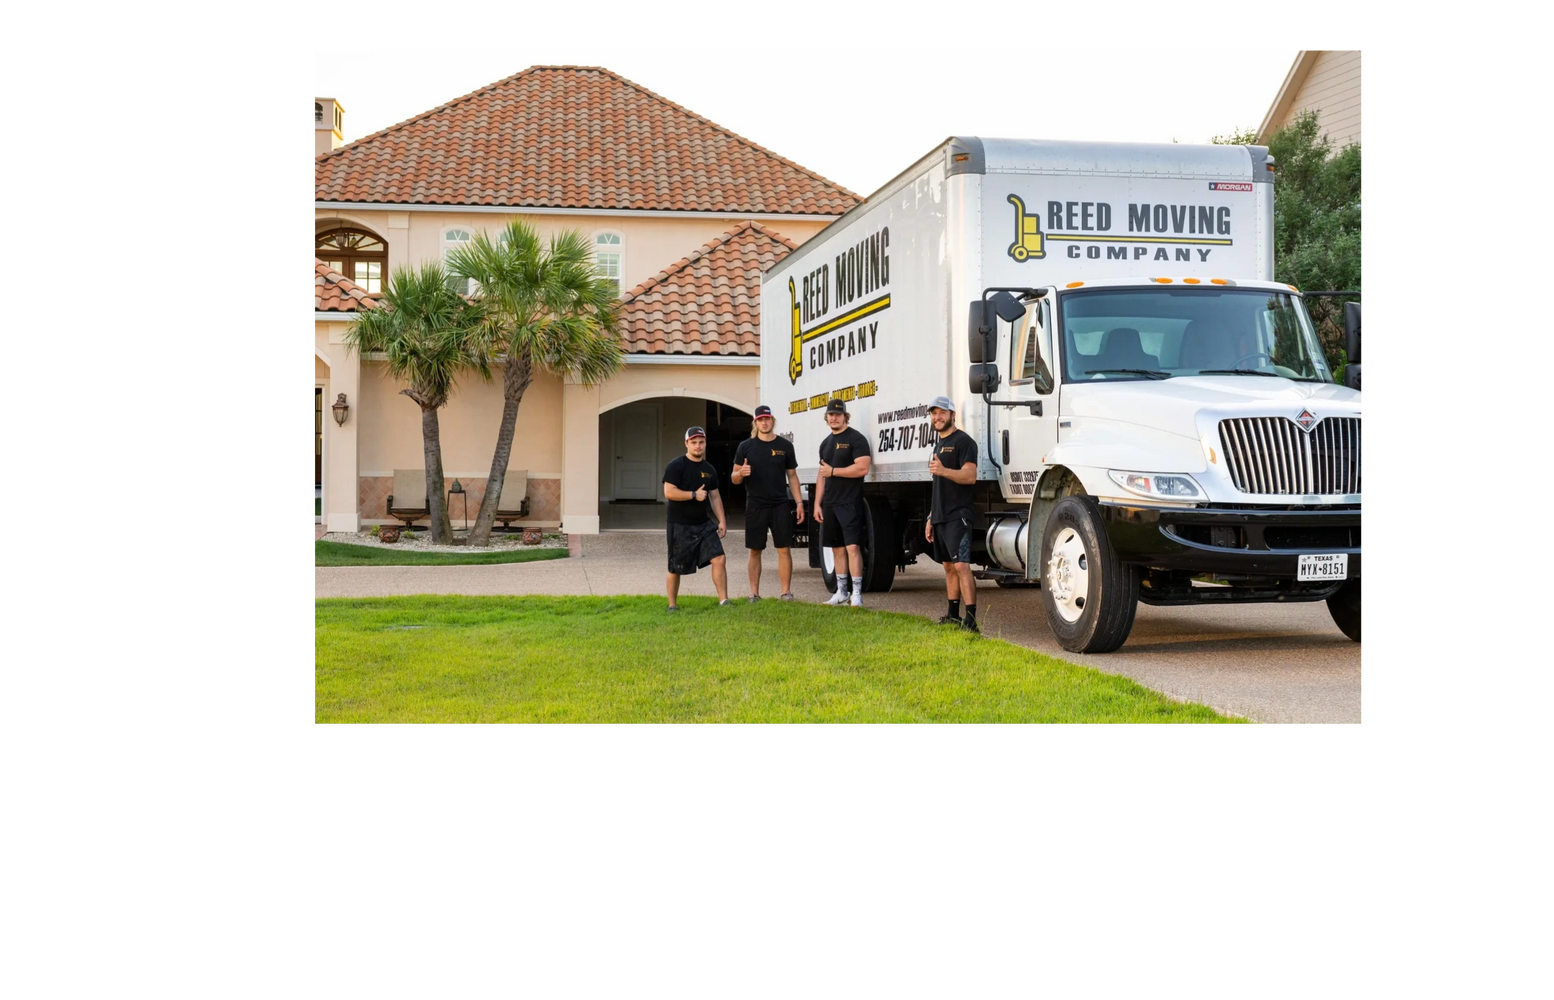 One of the Reed Moving trucks with a team of our professional and experienced movers,